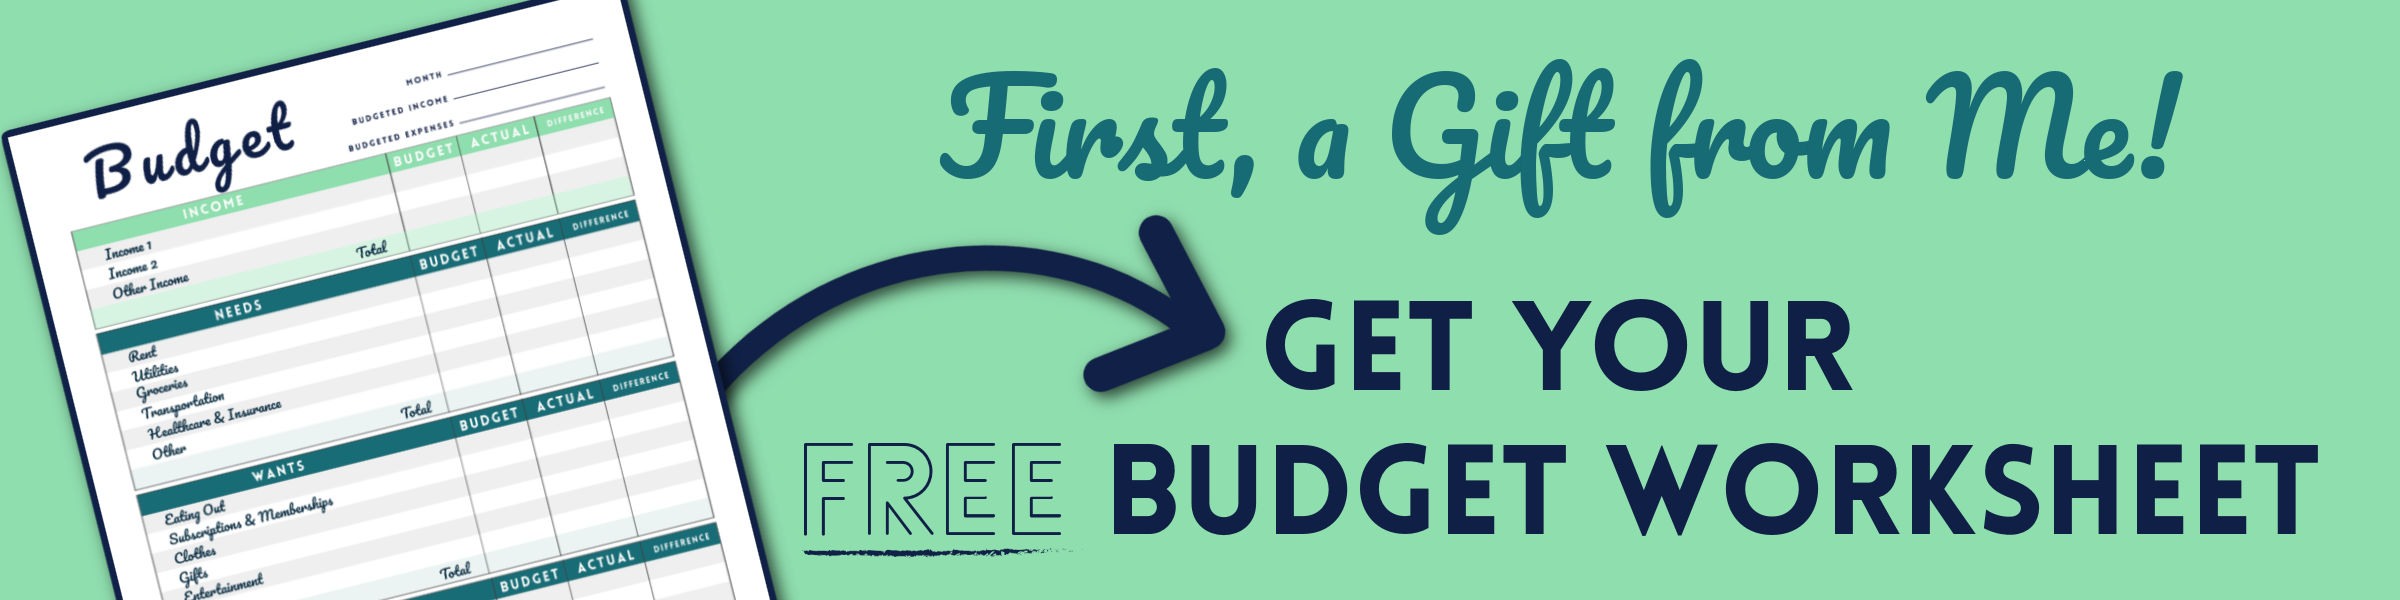 A Gift From Me Free Budget Worksheet from PositivelyFrugal.com